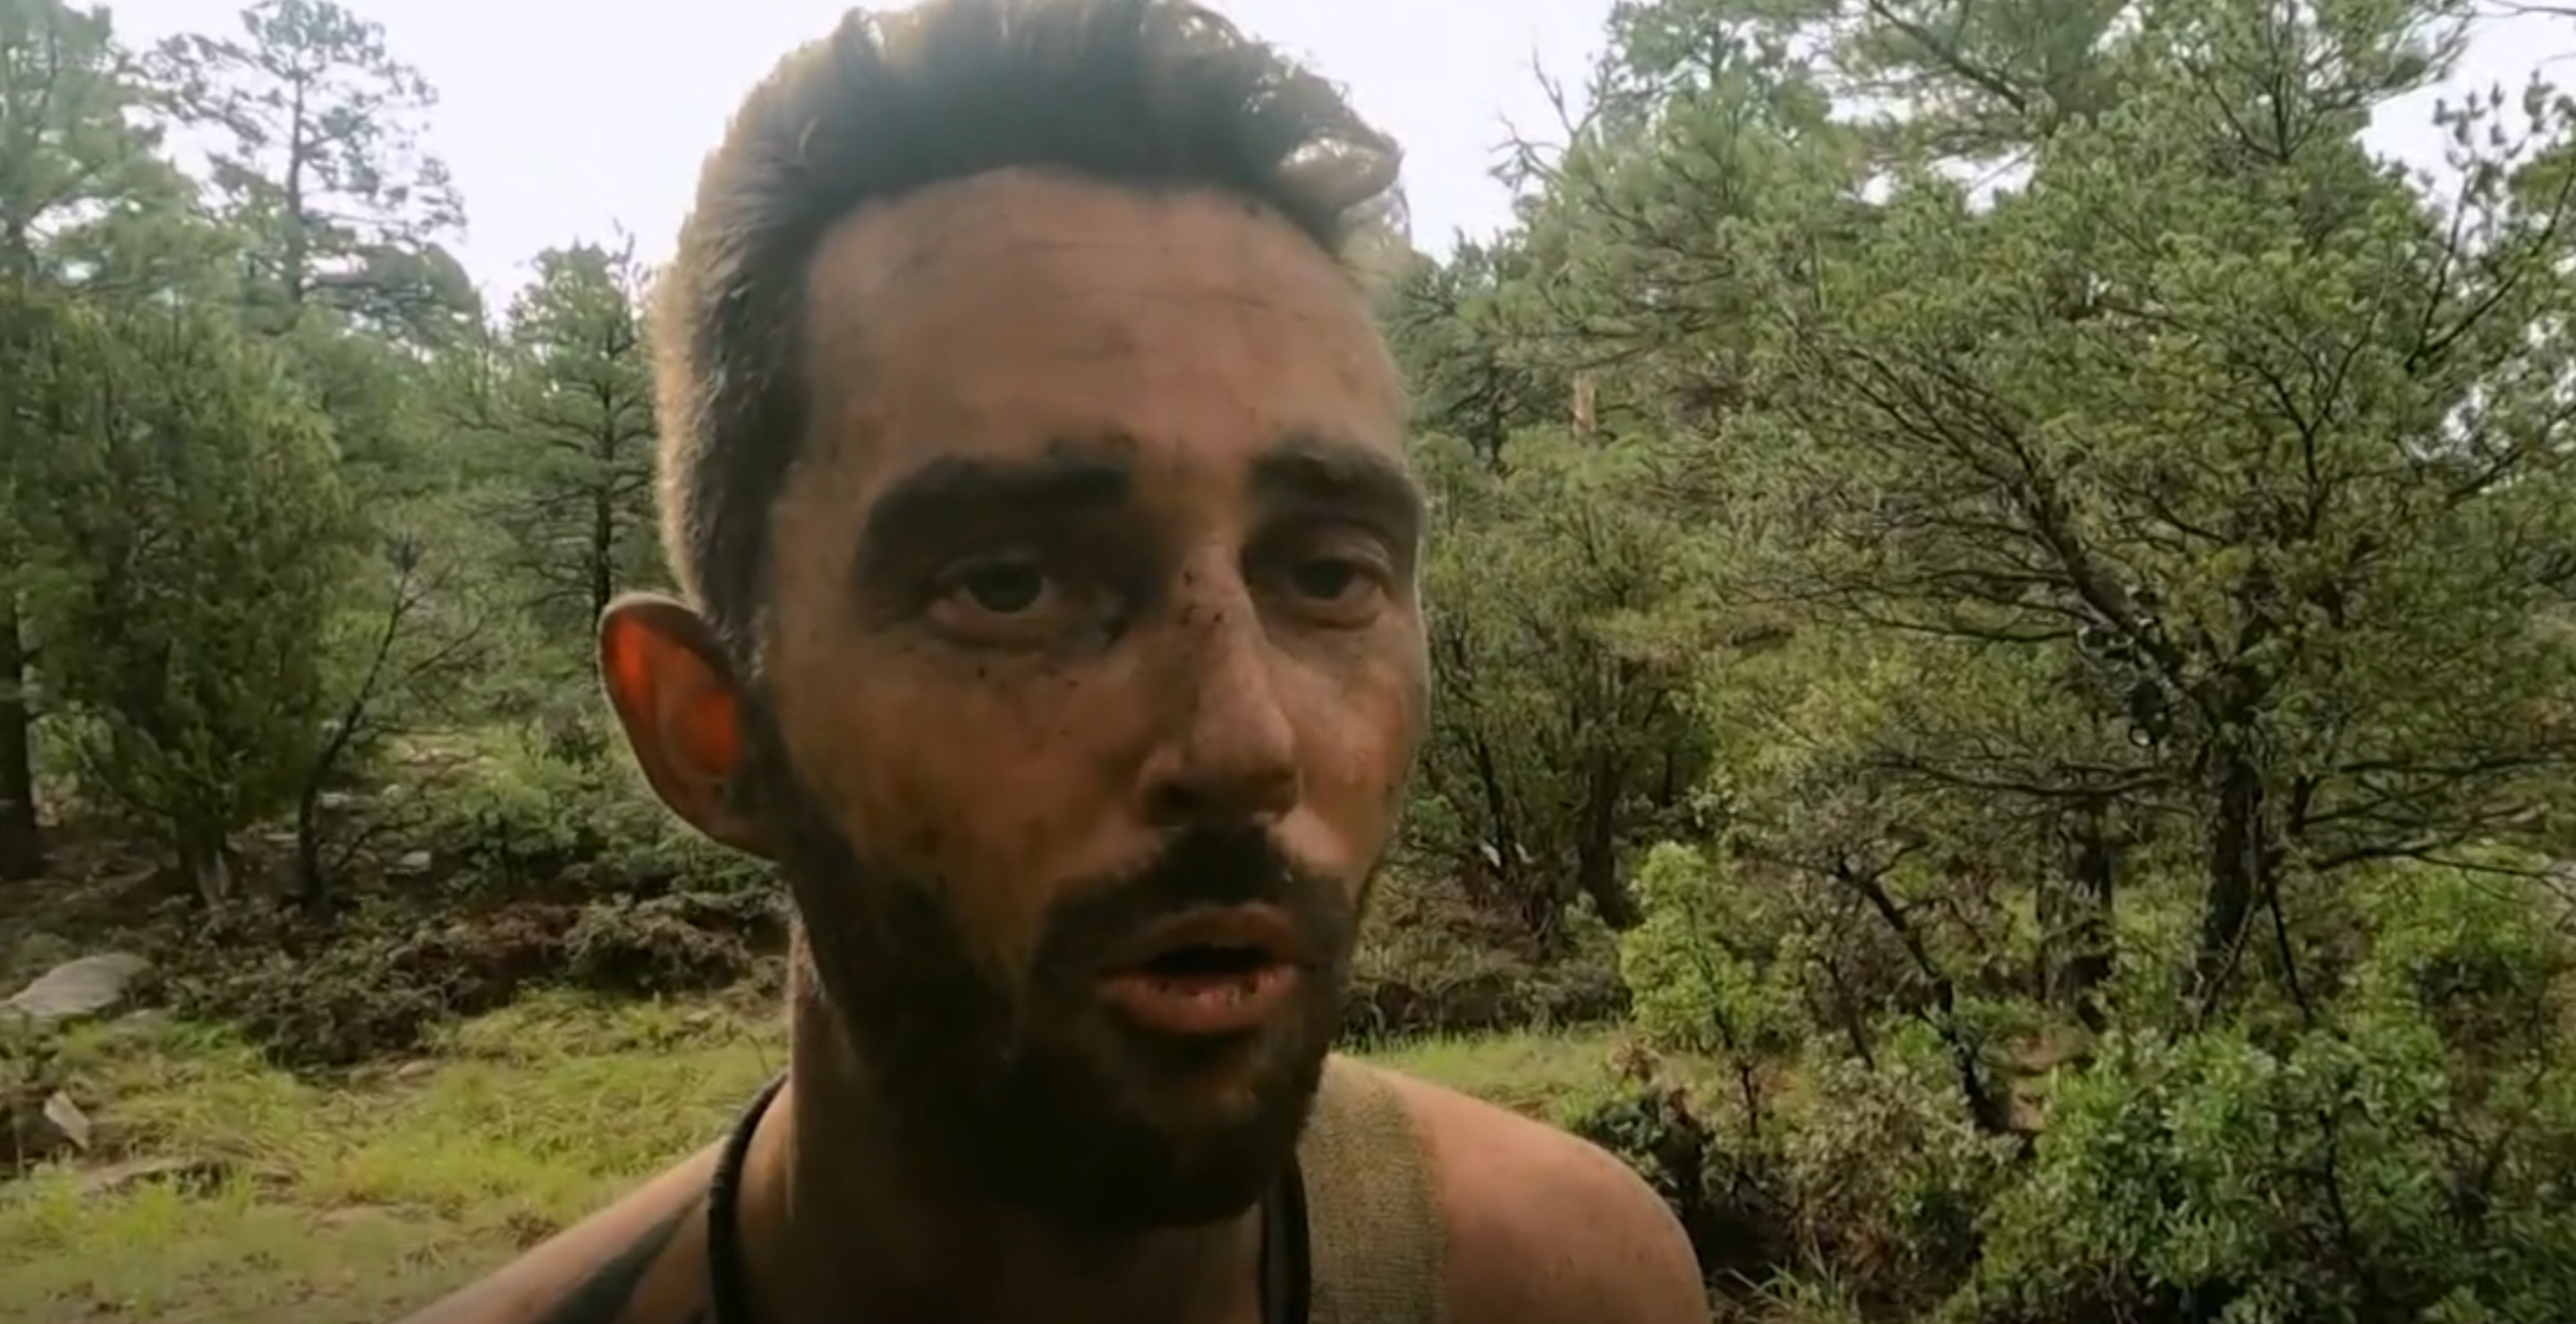 'Naked & Afraid' Survivalist Makes Every Man Wince By Getting A Tick You Know Where